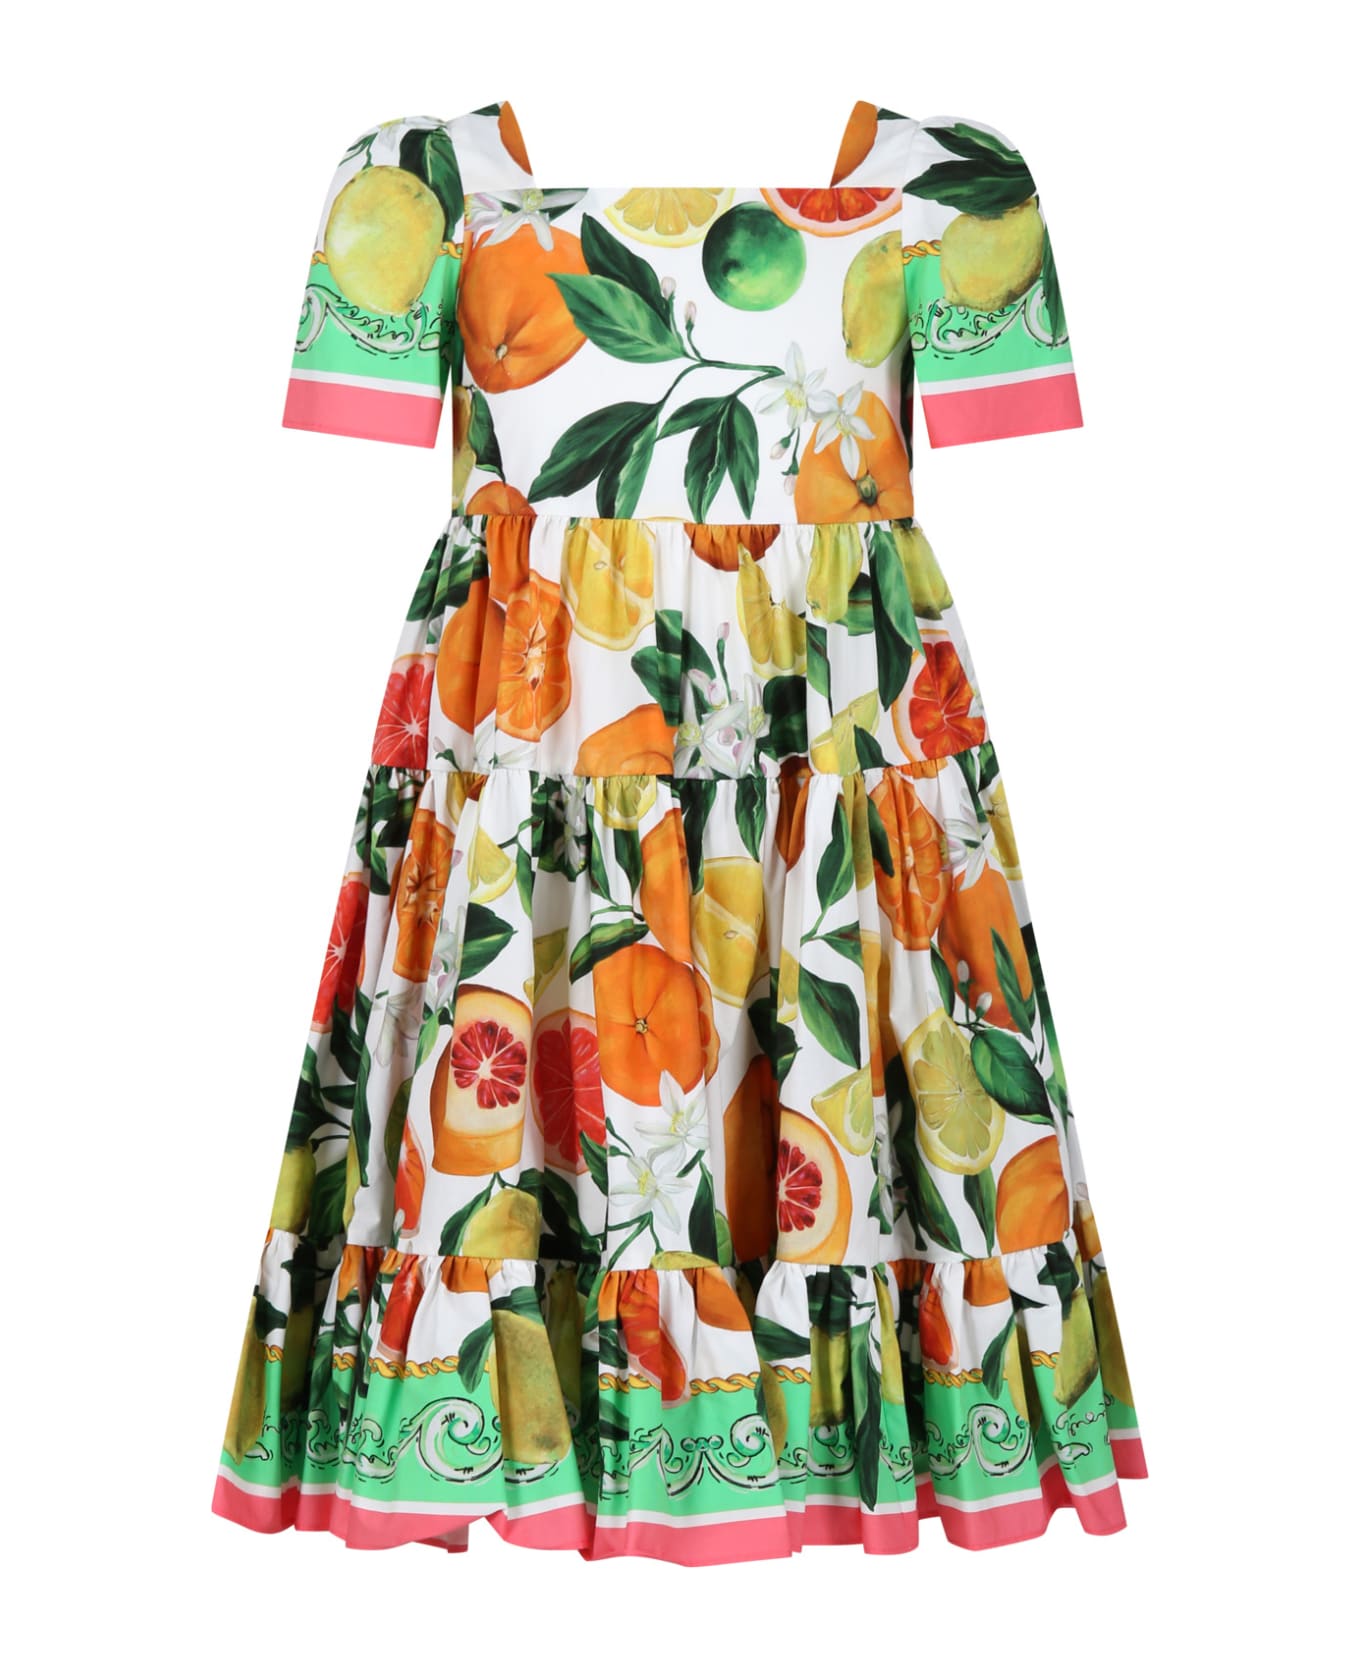 Dolce & Gabbana Multicolor Elegant Dress For Girl With An Italian Holiday Print - Multicolor